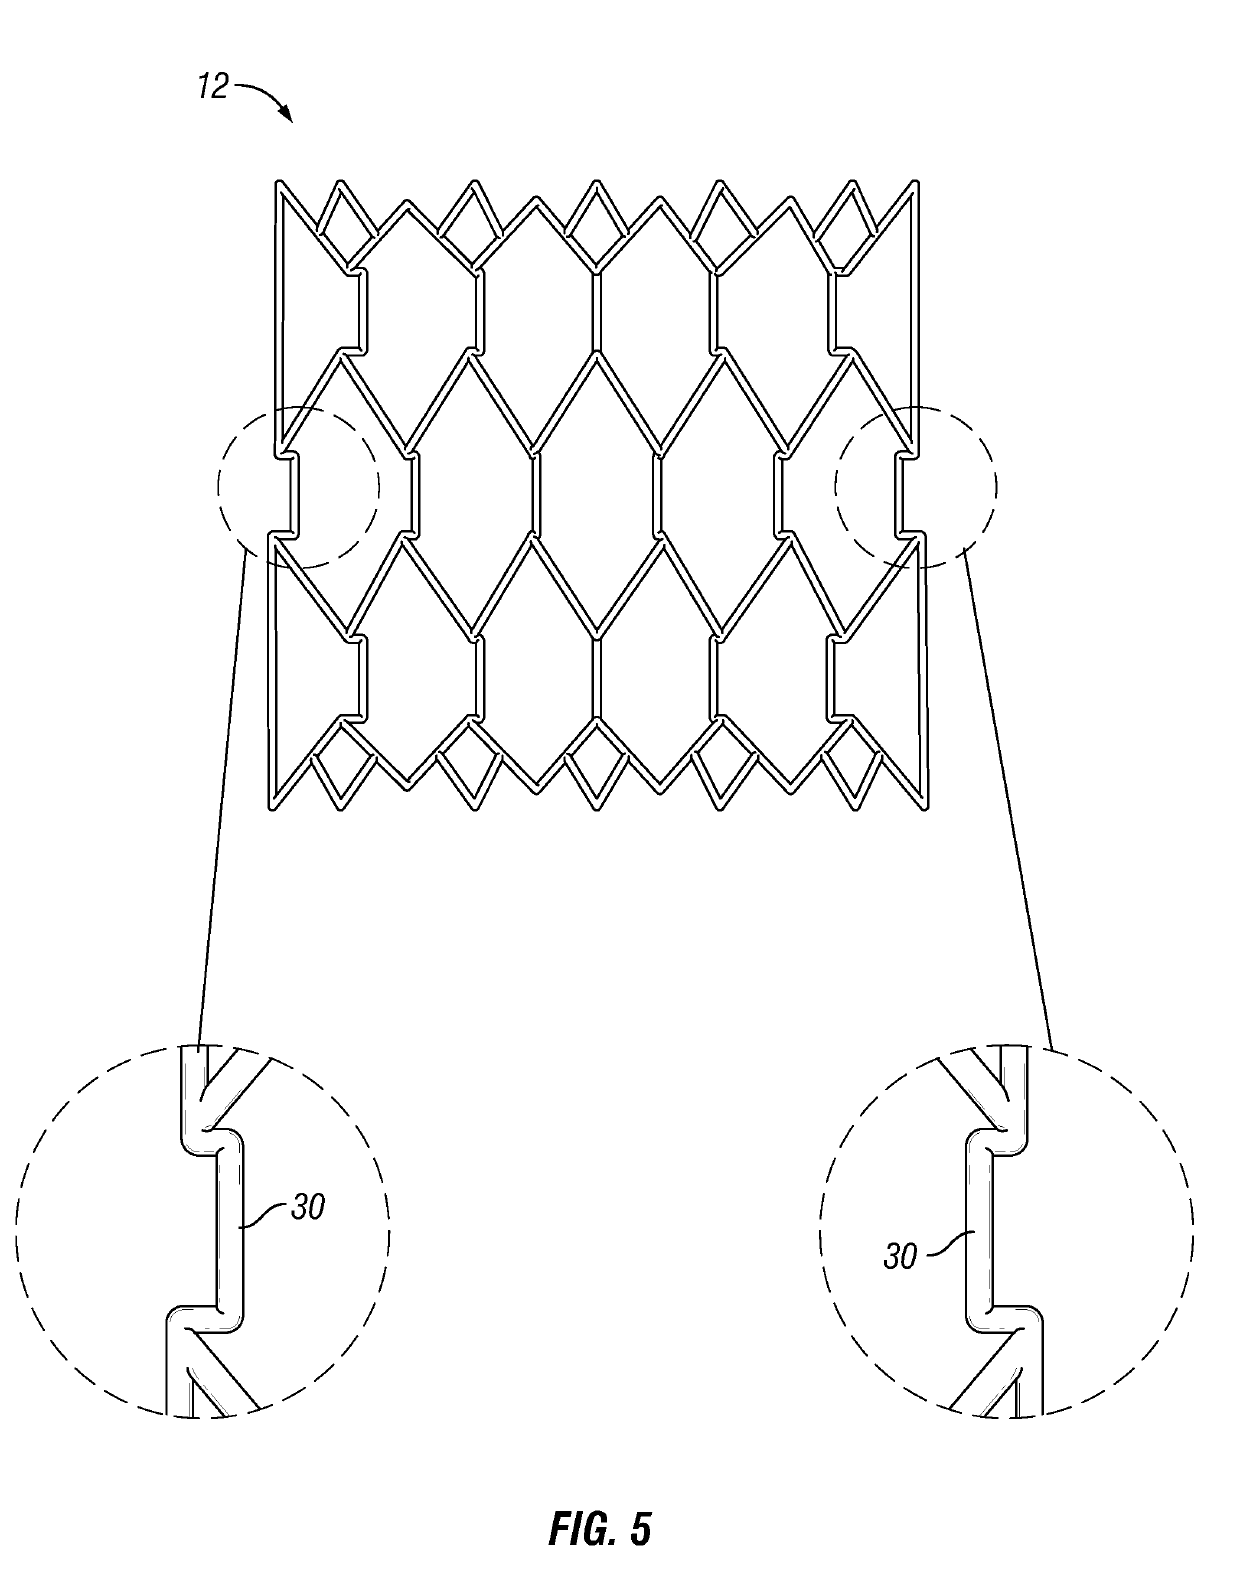 Docking Device for Aortic Valve Replacement